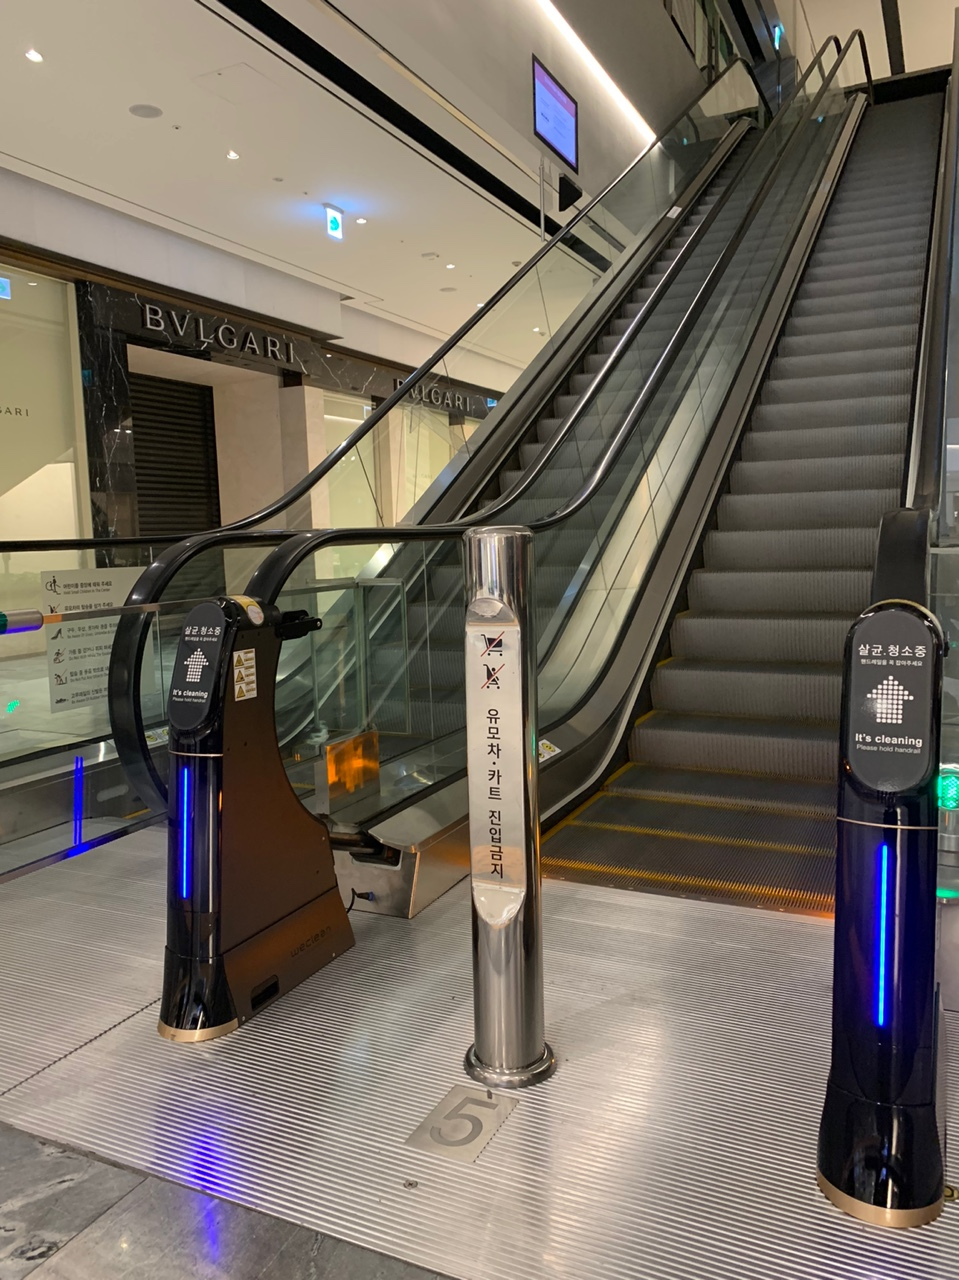 Shinsegae Department Store with WeClean, an escalator handrail sterilization, disinfection cleaner, 2